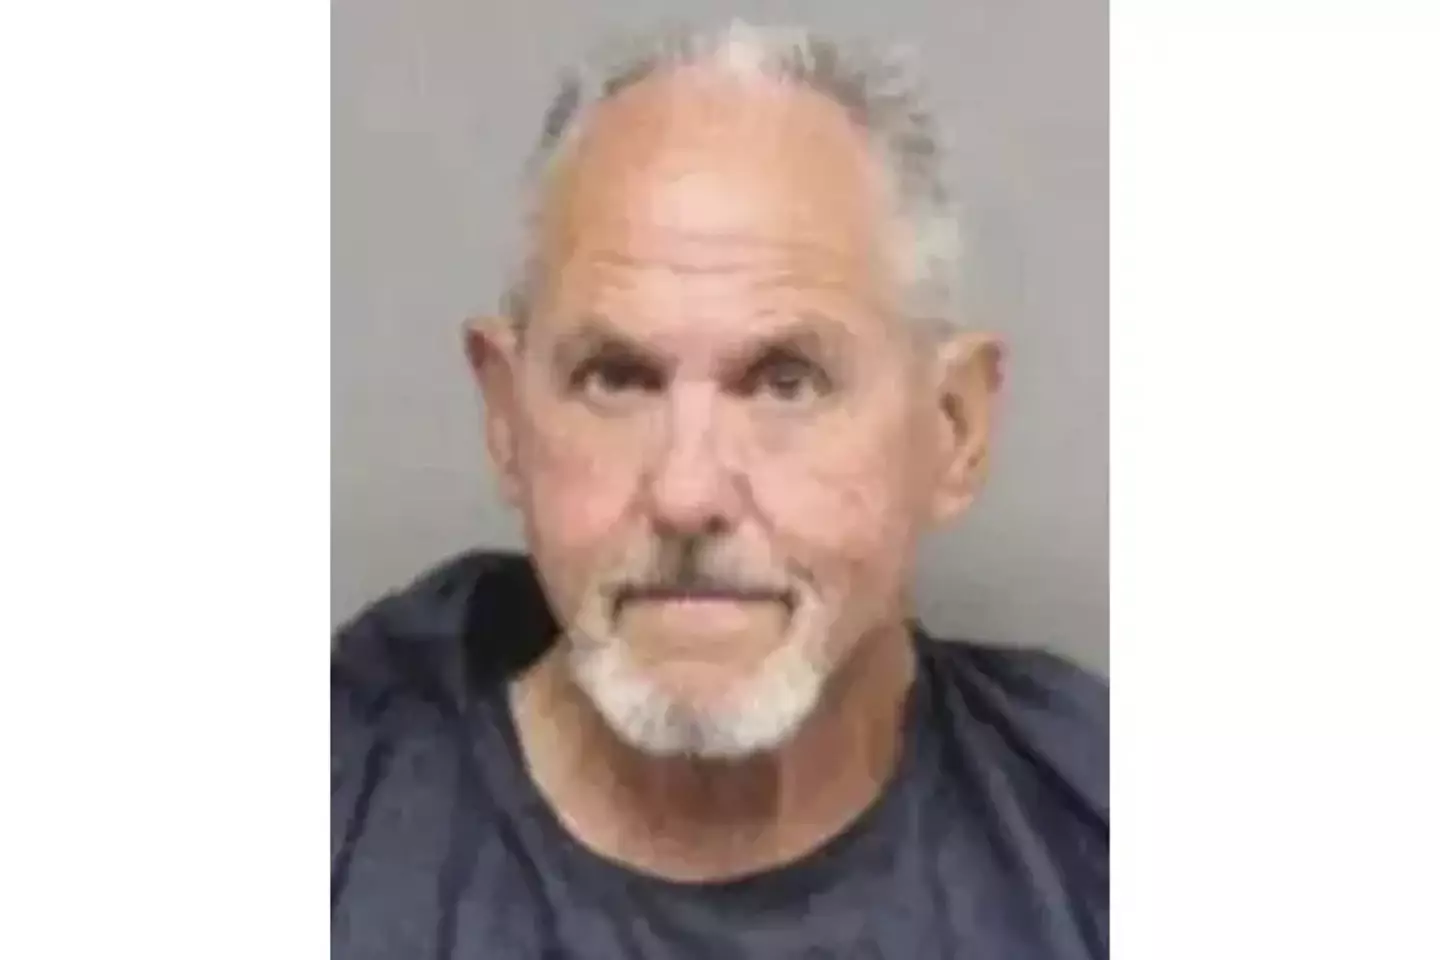 The Texas grandfather turned himself in after the incident.